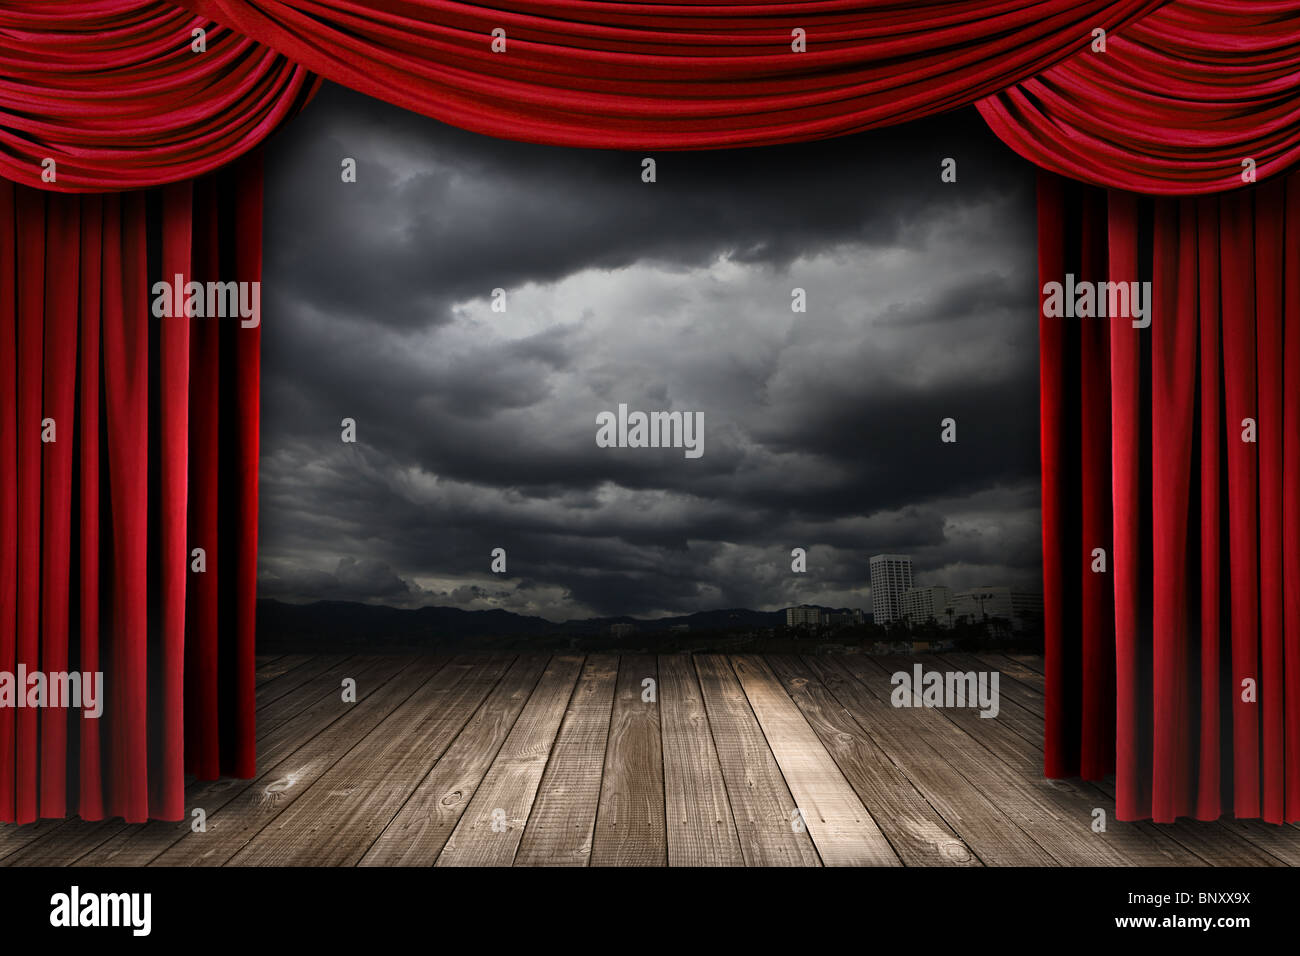 Bright Stage With Red Velvet Theater Curtains and Dramatic Sky Background Stock Photo